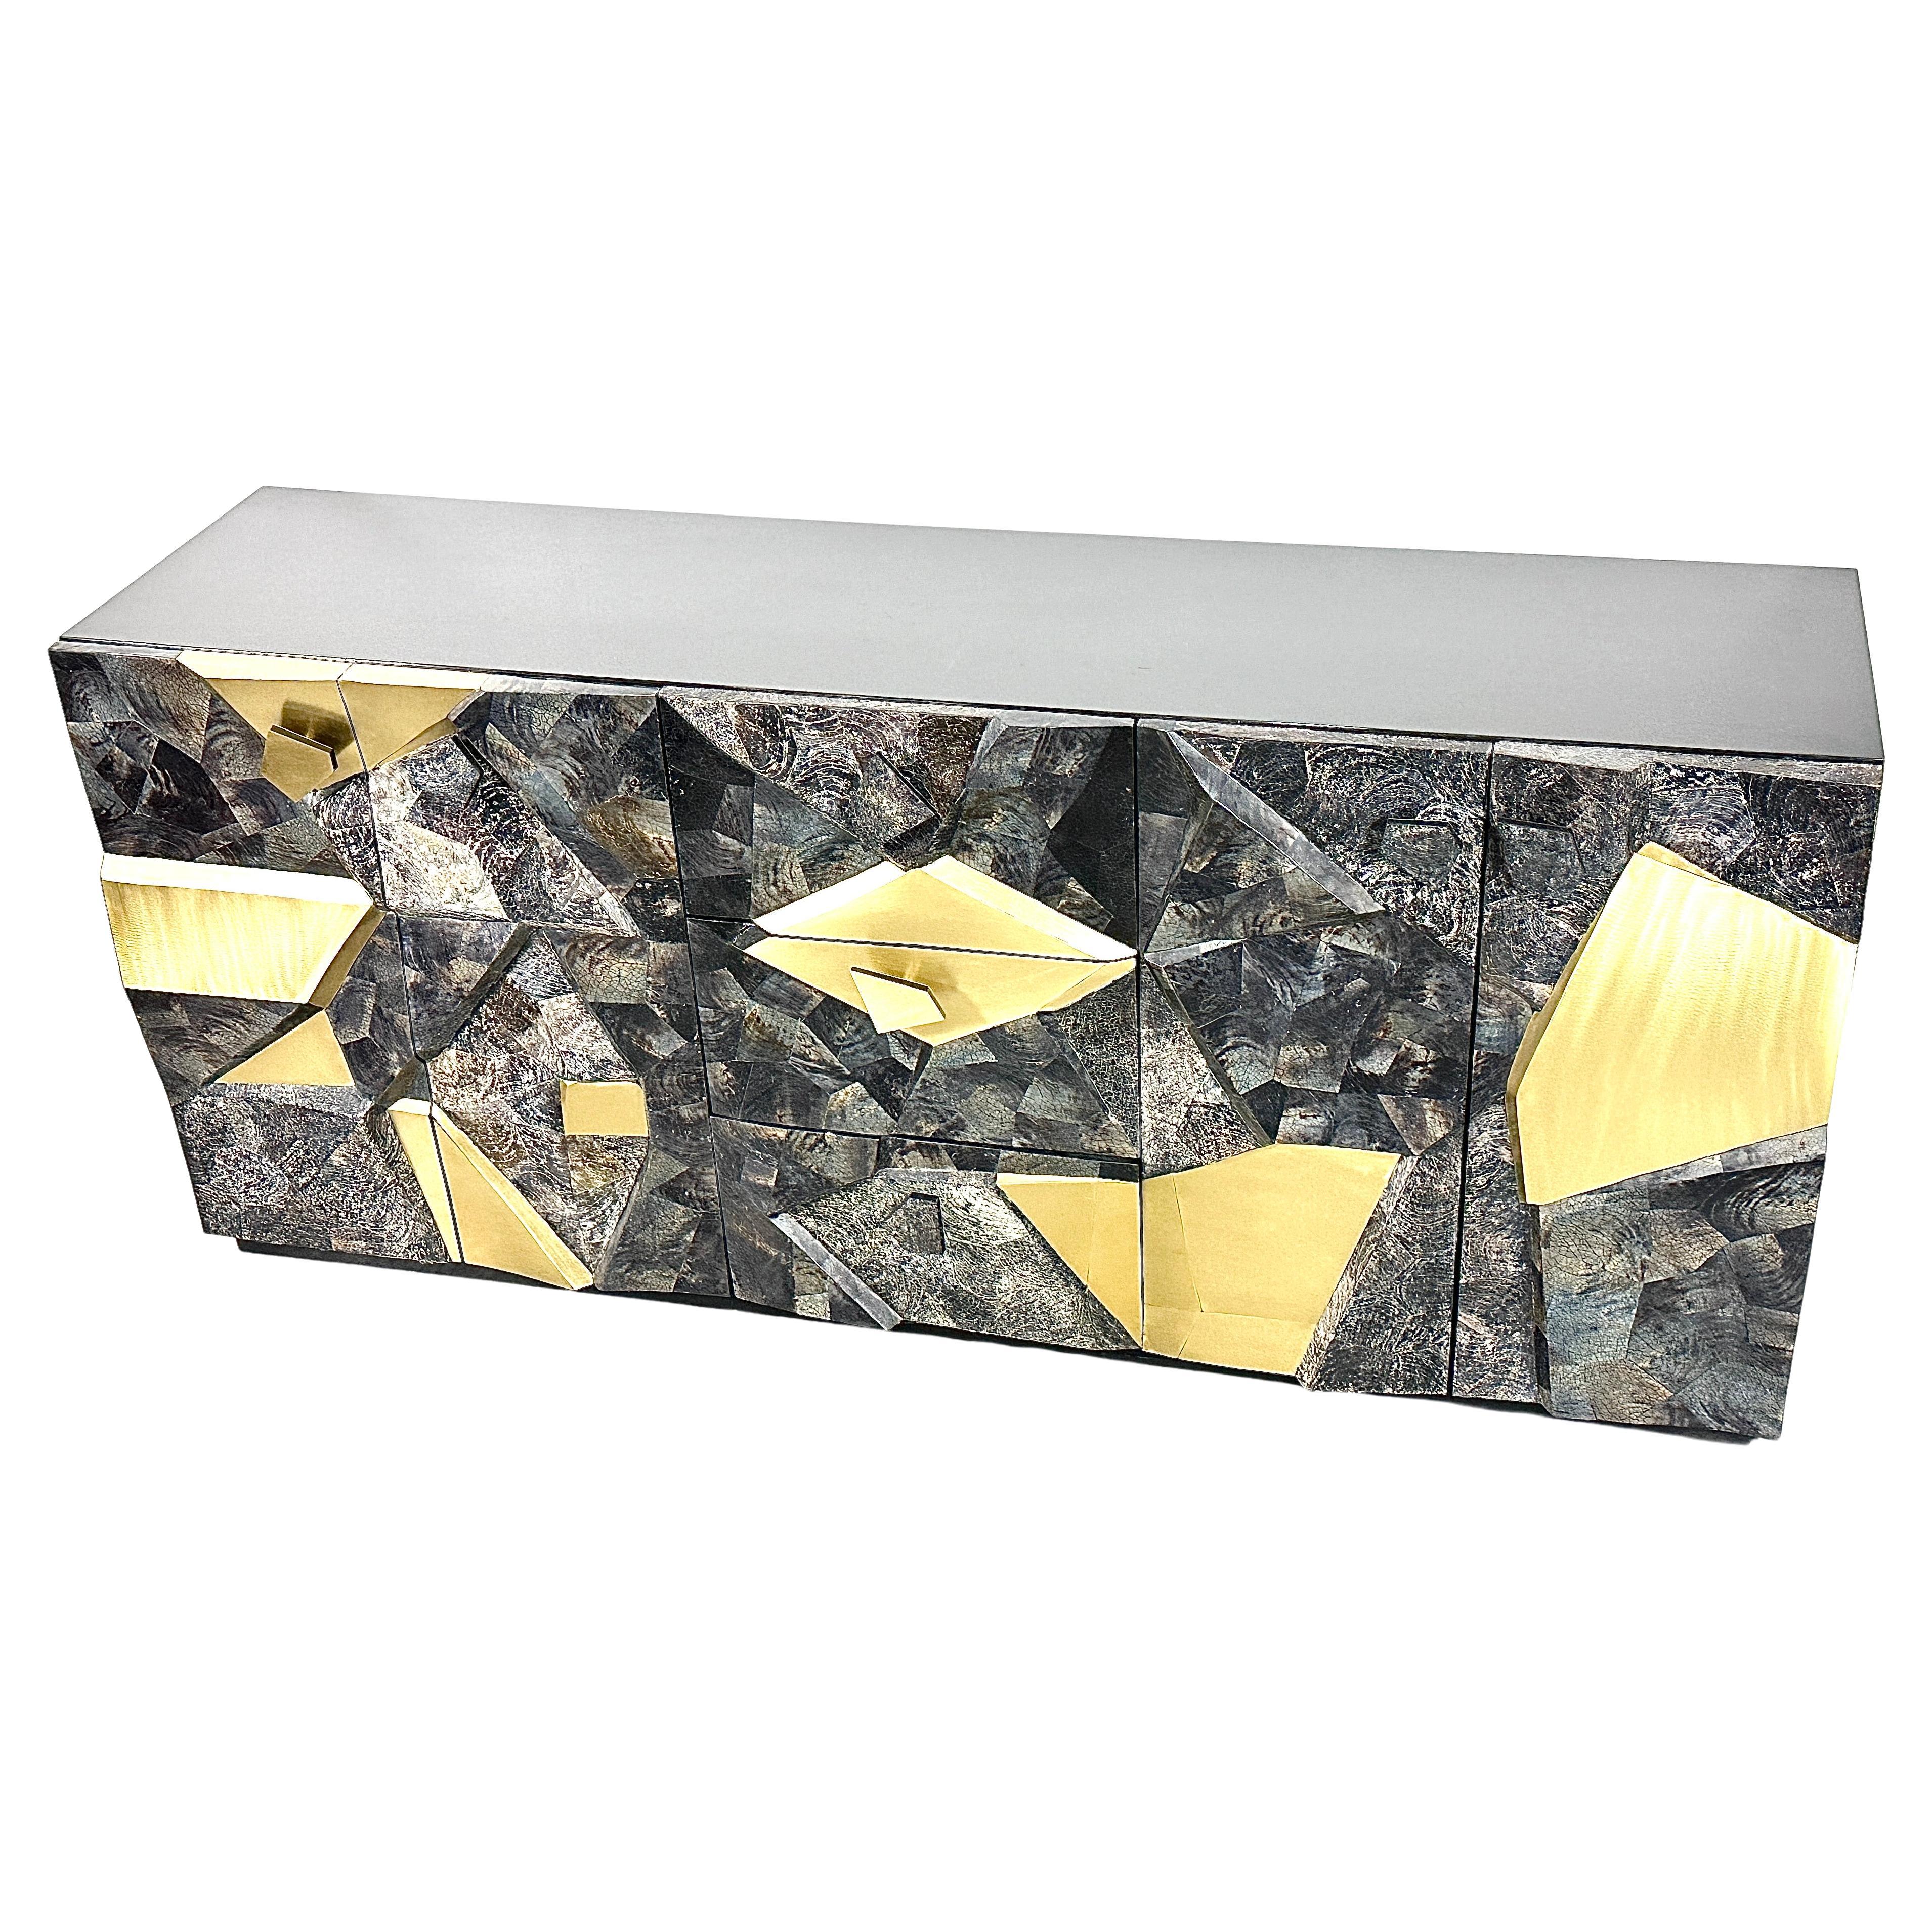 Brutalist Style Mosaic Stone and Brass Sculpture Front Relief Credenza Cabinet  For Sale